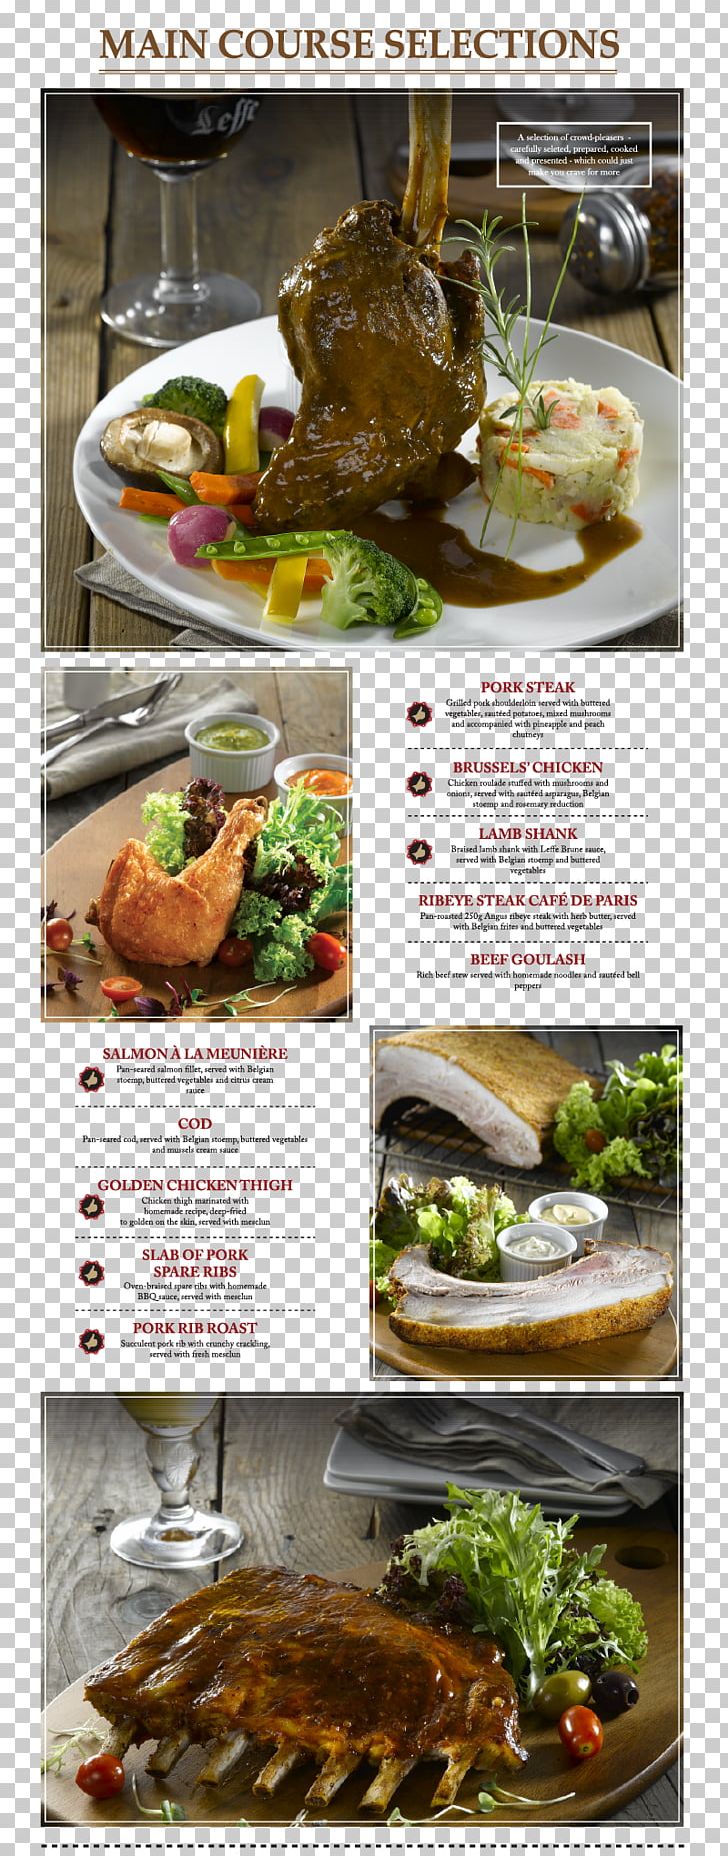 Romeritos Recipe Meal PNG, Clipart, Cuisine, Dish, Food, Main Course, Meal Free PNG Download